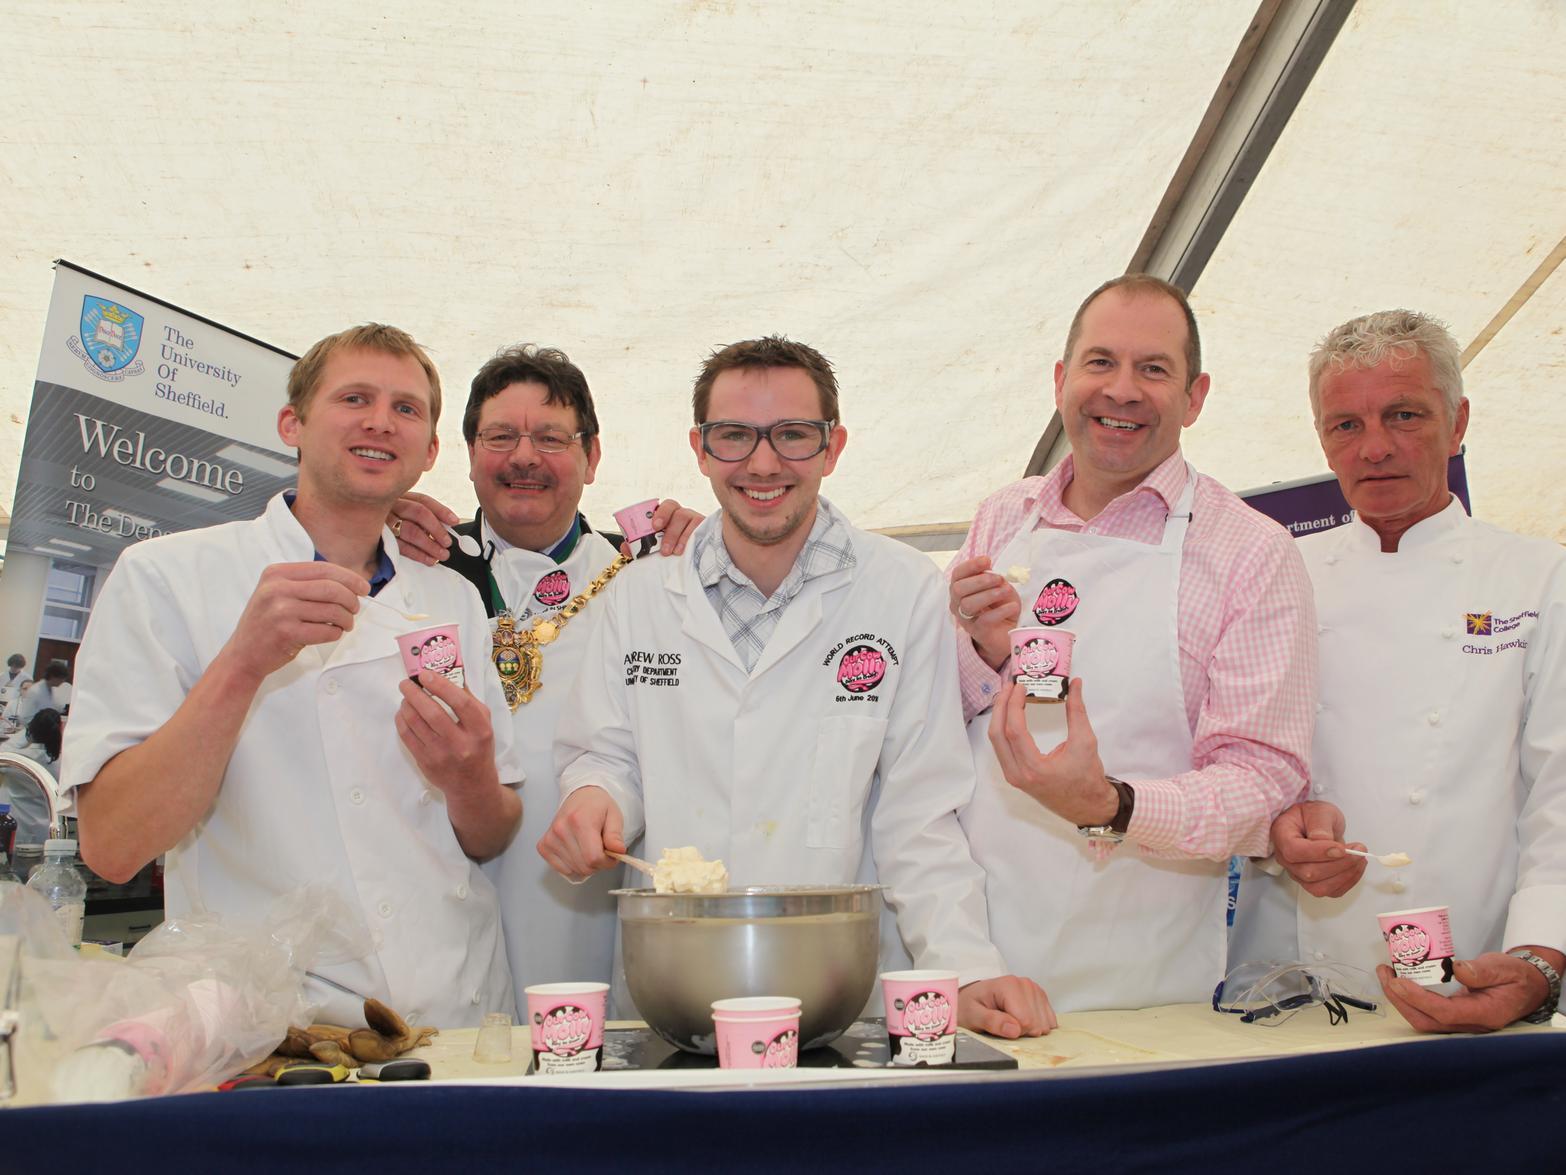 The fastest time to make one litre of ice cream is 10.34 seconds and was achieved by Andrew Ross (UK) at Cliffe Cottage in Sheffield, South Yorkshire, UK, on 6 June 2010.